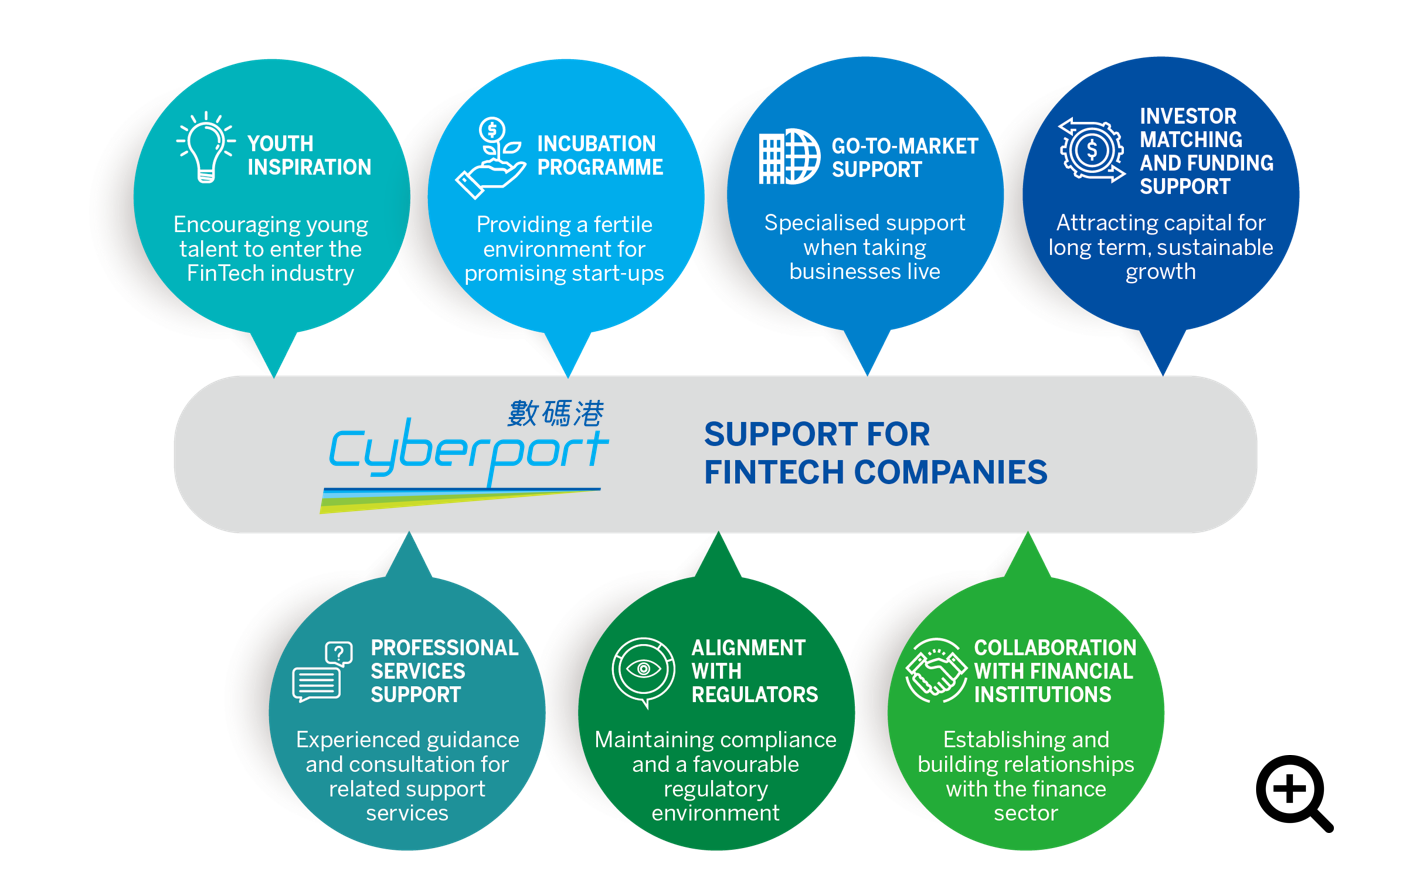 Cyberport empowers FinTech start-ups to expand to global markets